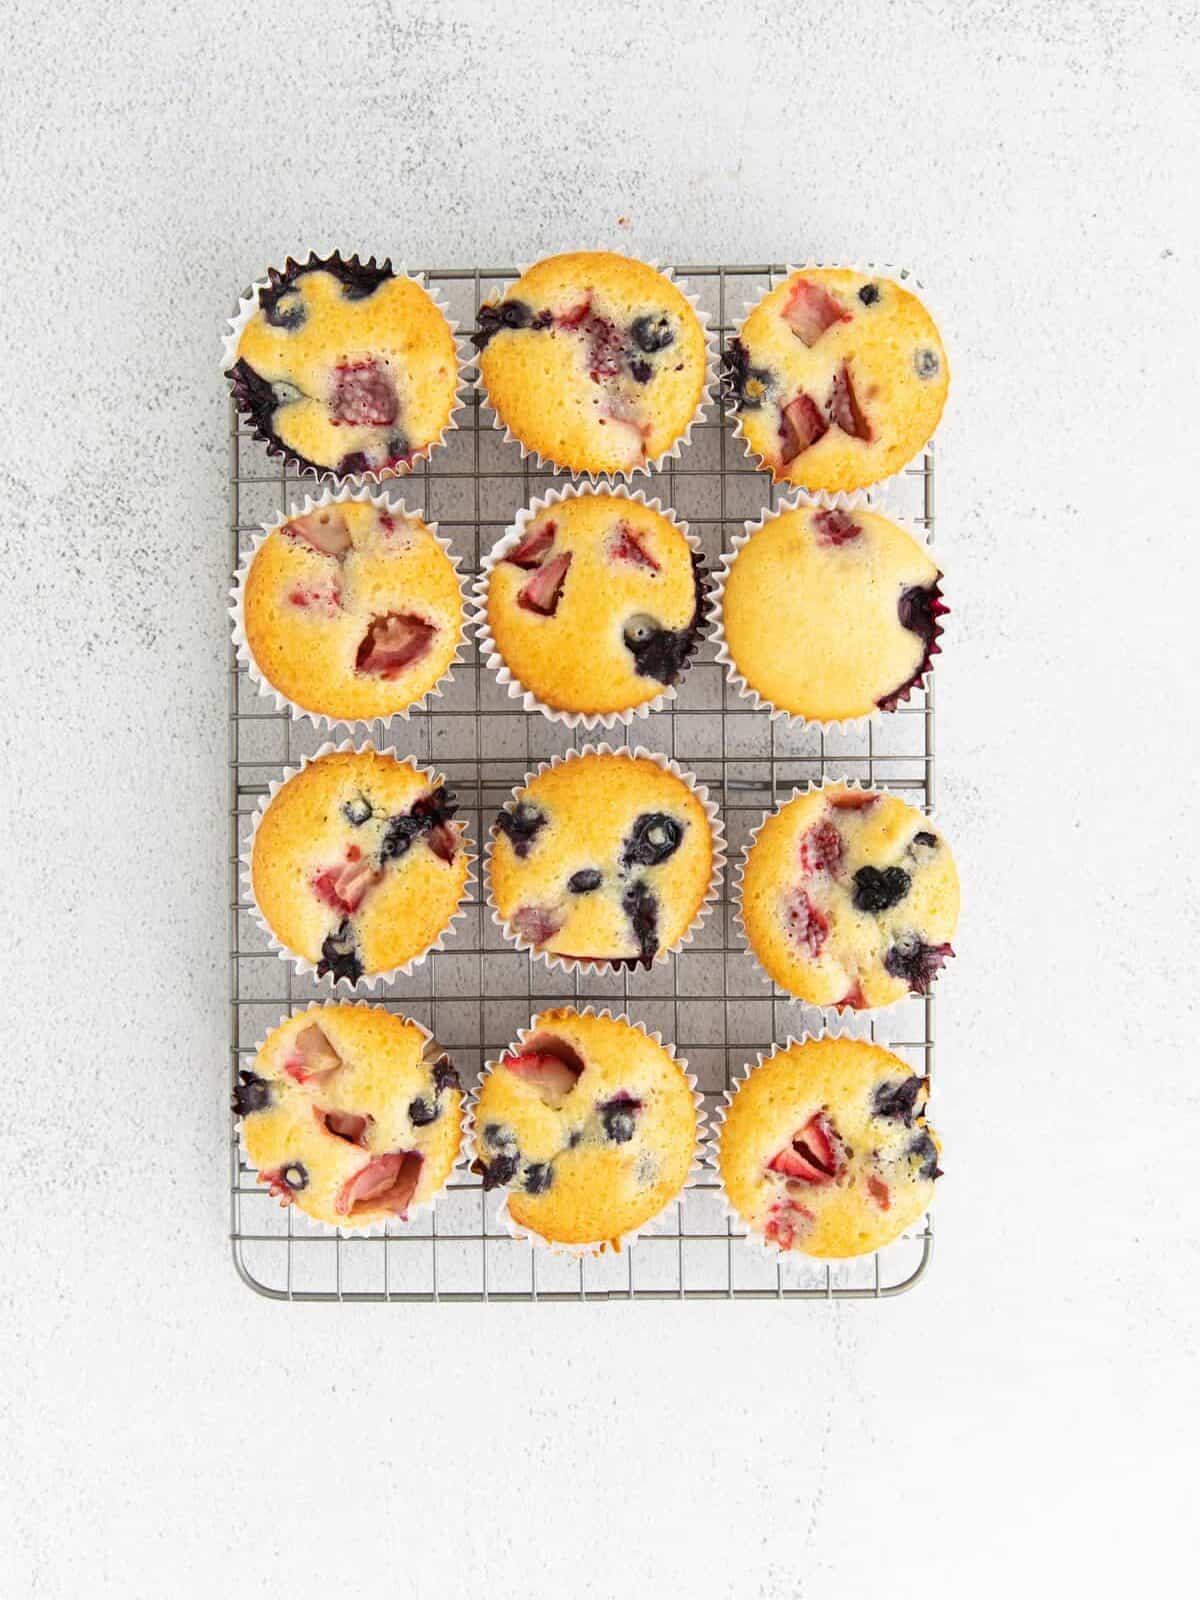 12 baked wildberry muffins on a wire rack.